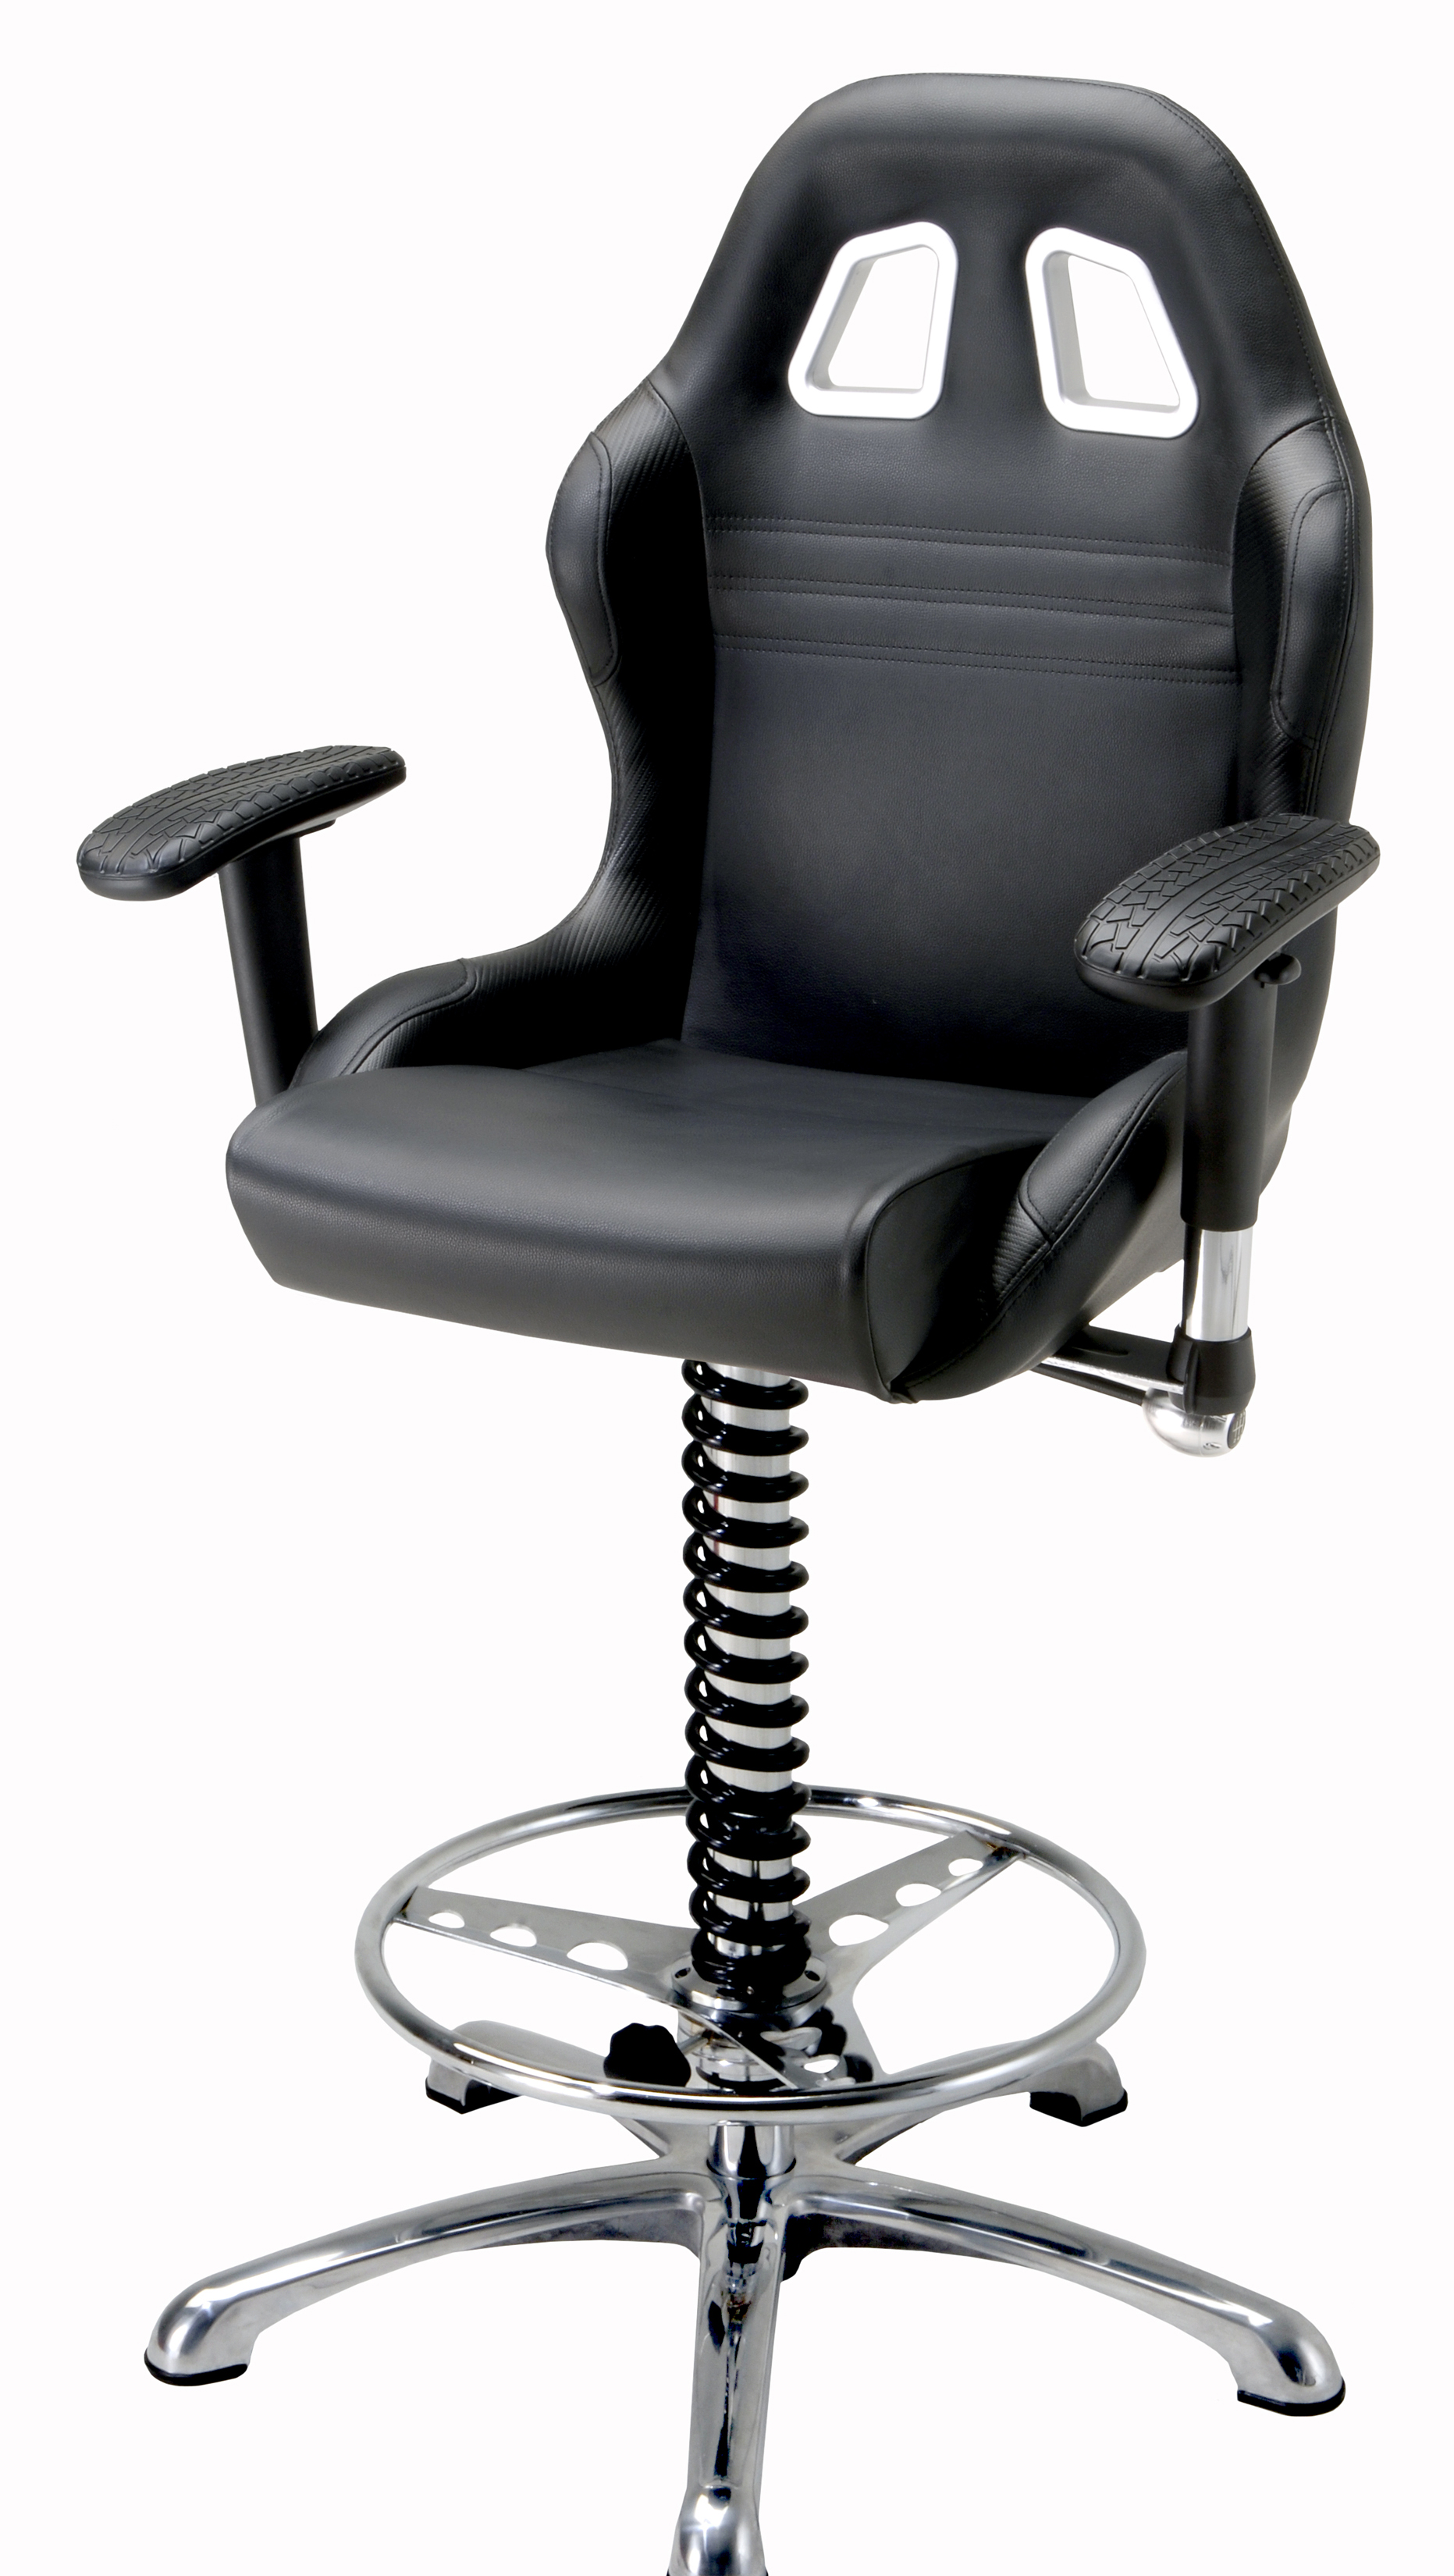 Intro-Tech Automotive, Pitstop Furniture, BC6000B Chief Chair Black, Bar Chair